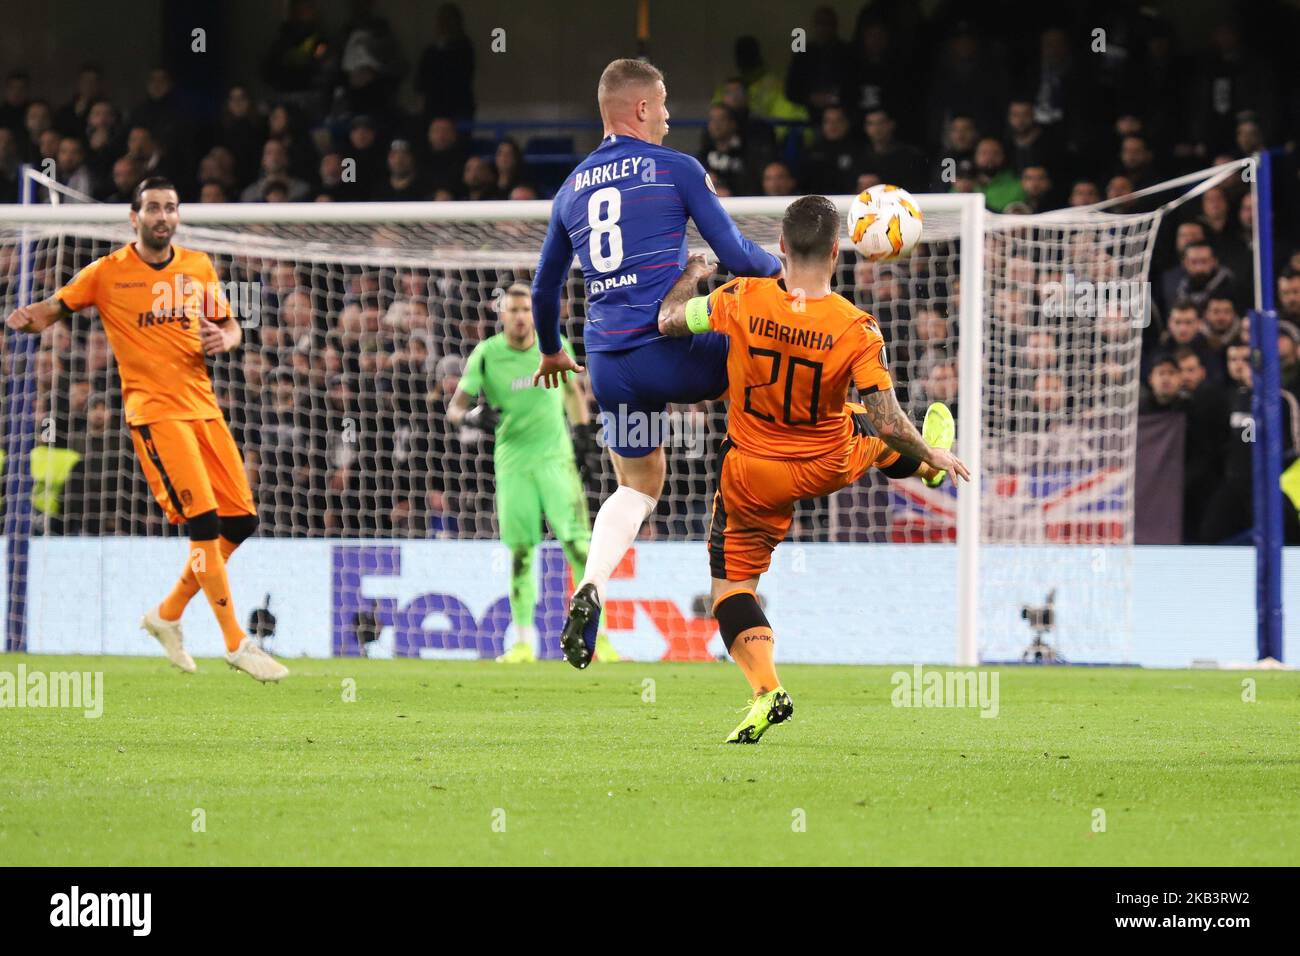 Ross Barkley Chelsea's #8 and Vieirinha PAOK's #20 in action during the UEFA Europa League Group L match between Chelsea and PAOK at Stamford Bridge on November 29, 2018 in London, United Kingdom. (Photo by Nicolas Economou/NurPhoto) Stock Photo